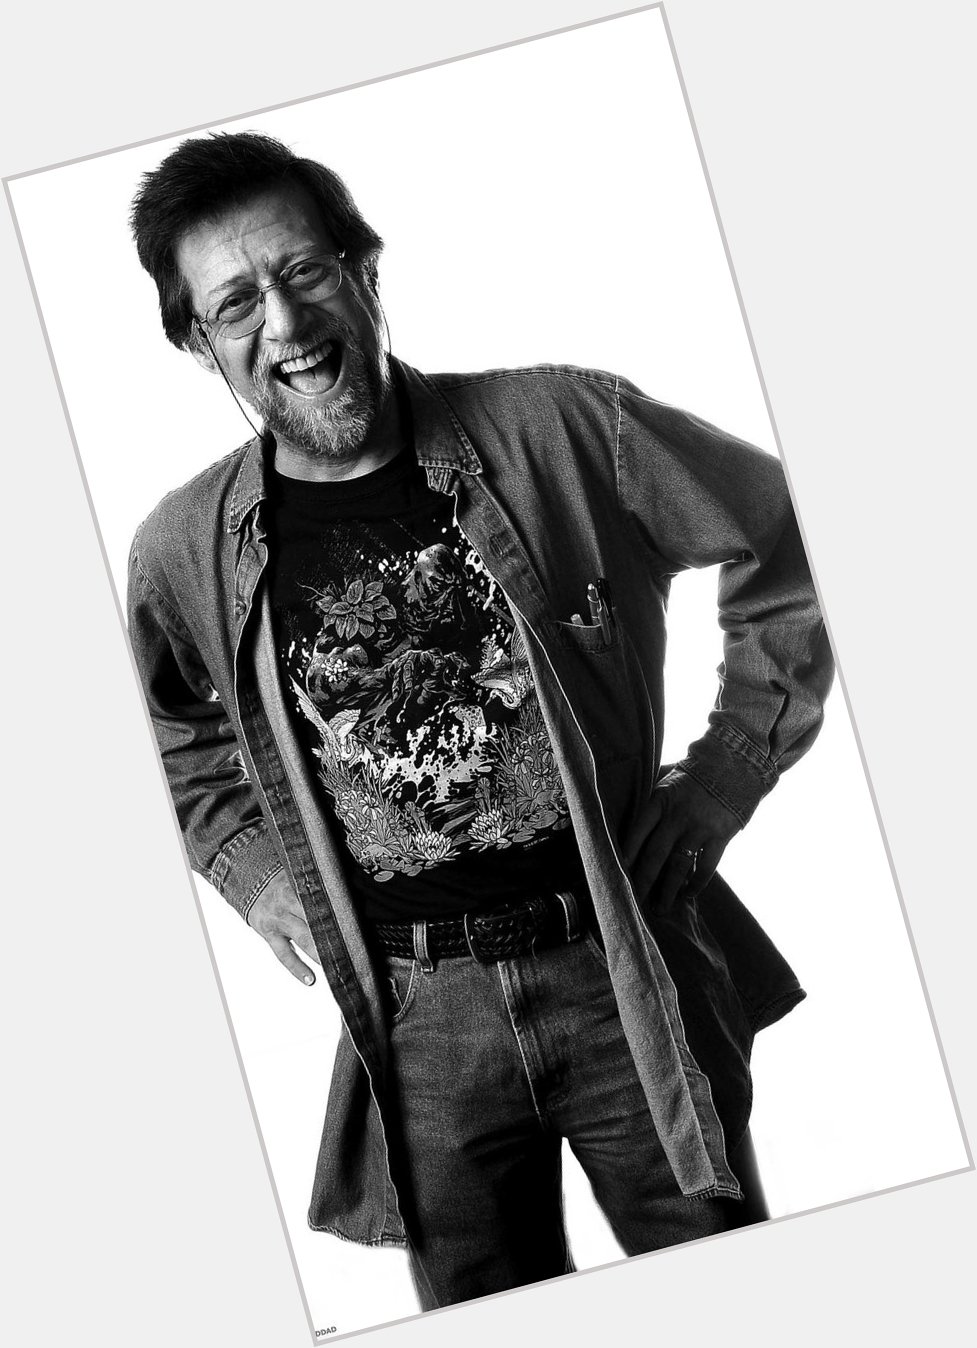 Happy Birthday Len Wein! You live on through your creations and those you have inspired! 